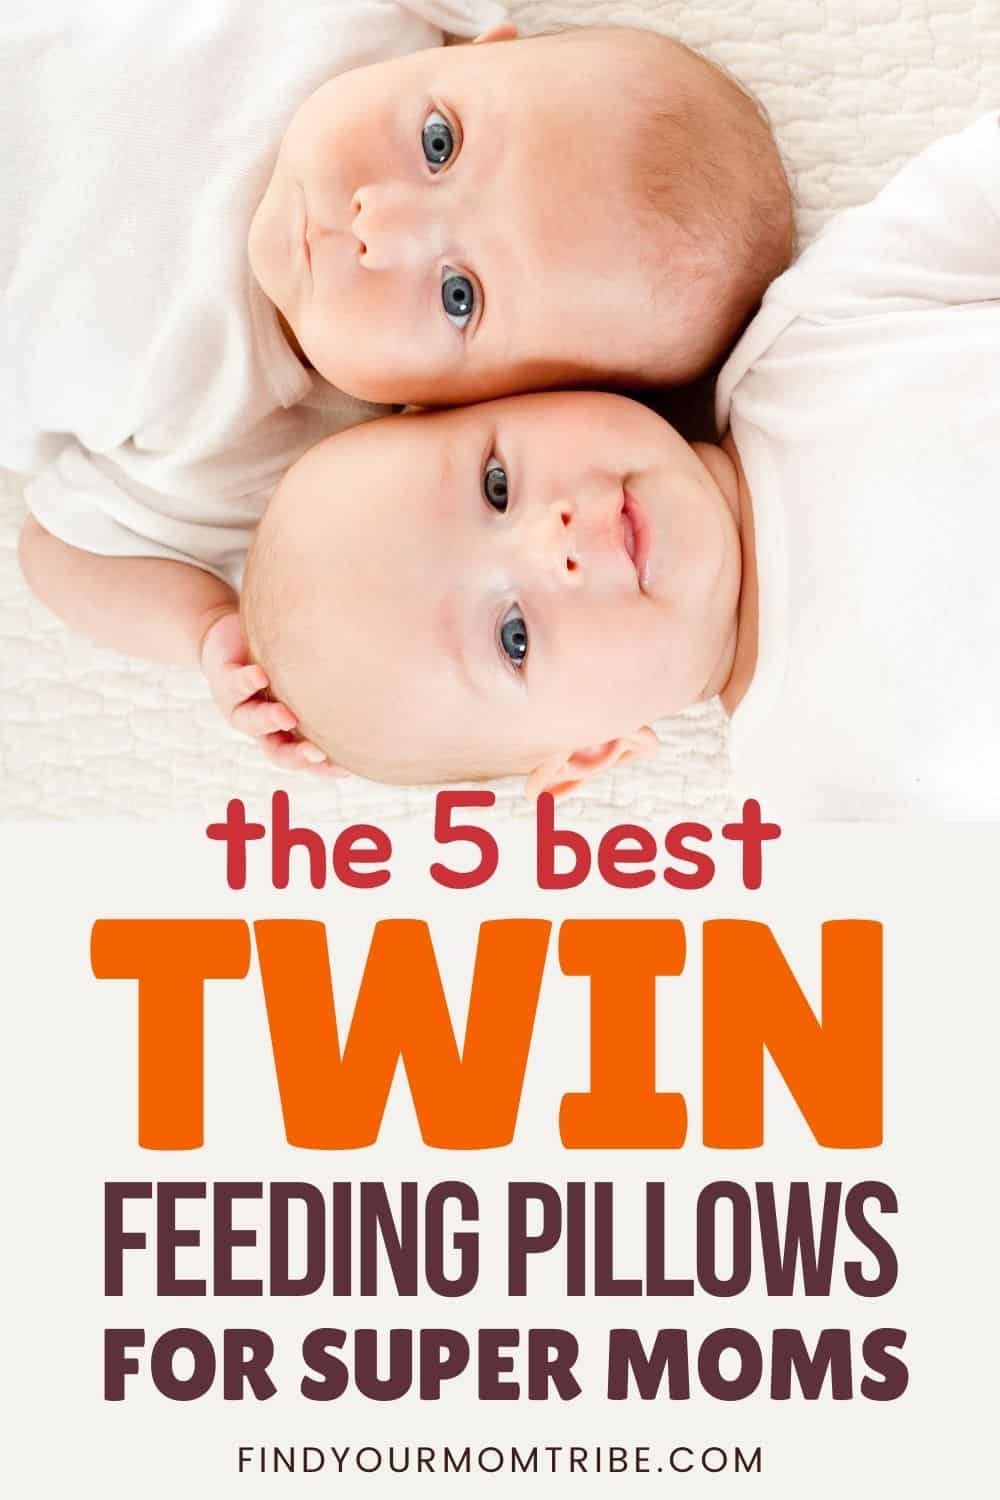 The 5 Best Twin Feeding Pillows For Super Moms